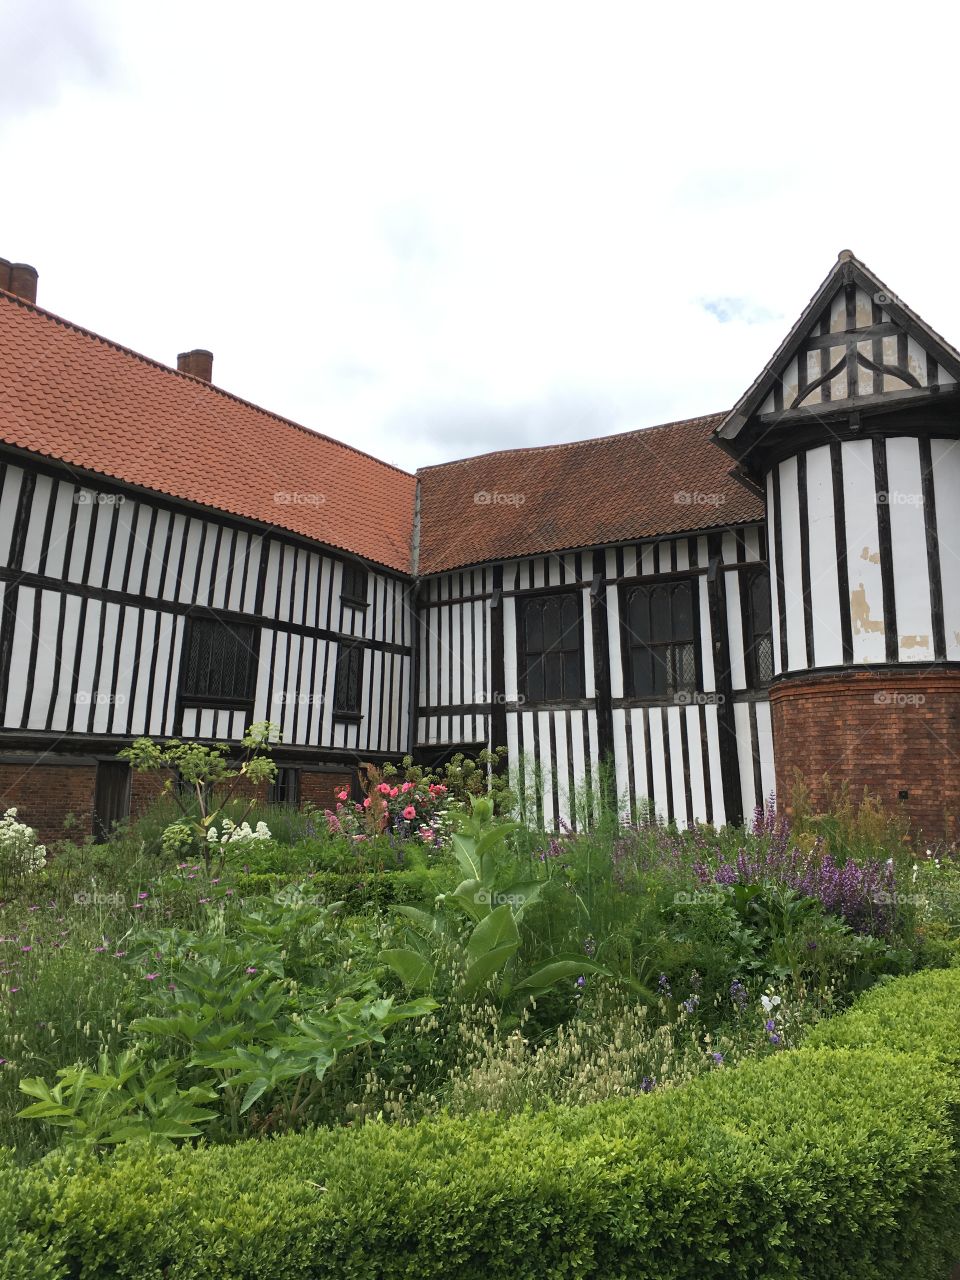 Mediaeval black and white exterior of Gainsborough Old Hall building in England